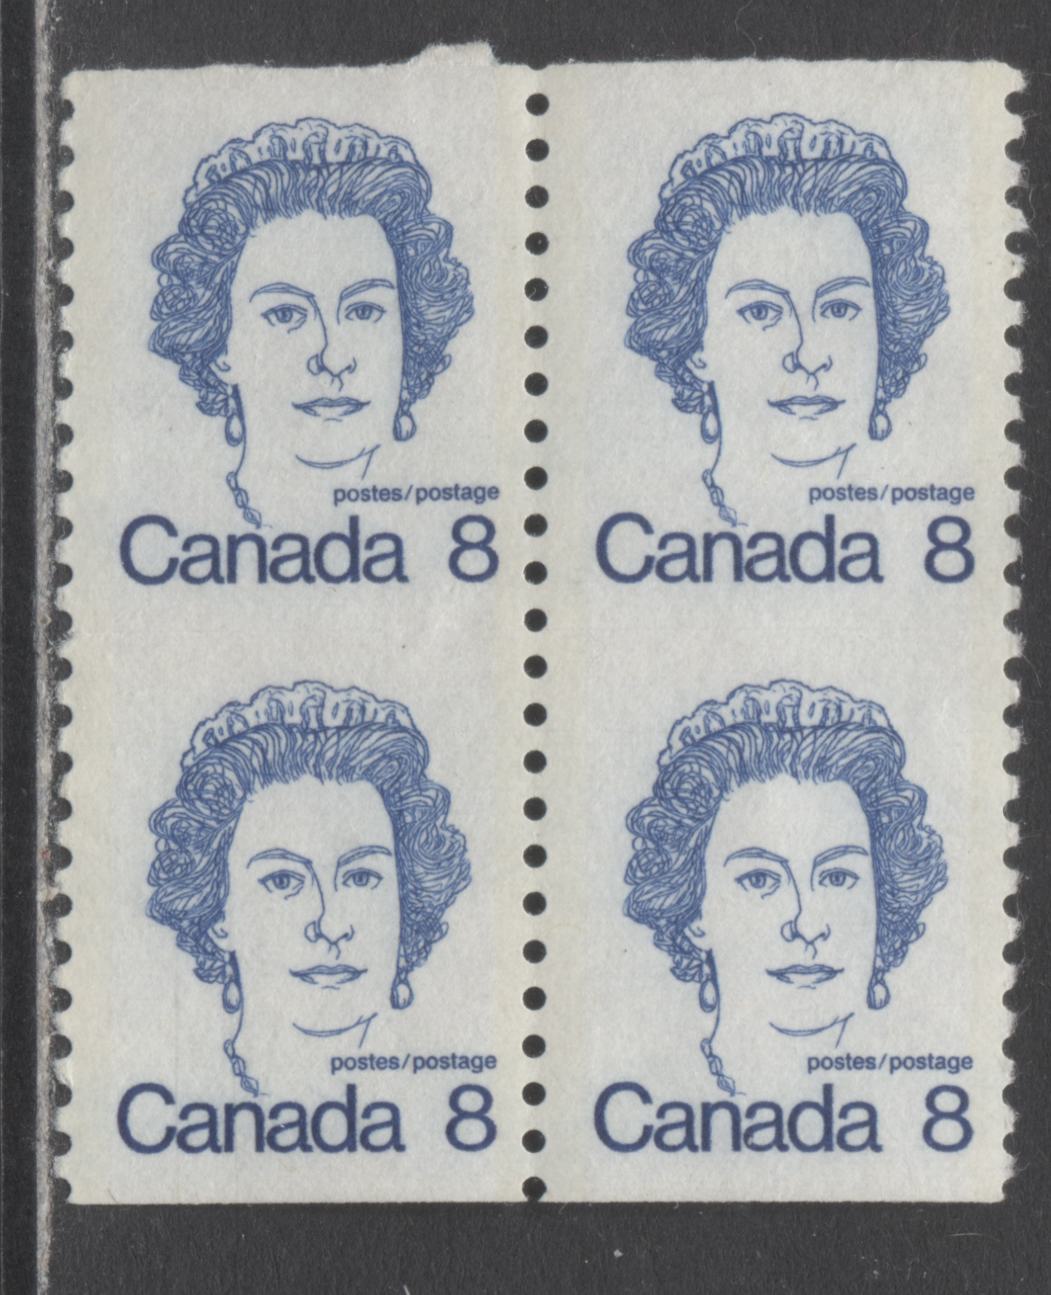 Lot 333 Canada #604viii 8c Royal Blue Queen Elizabeth II, 1974 - 1976 Caricature Definitives - Coil Stamps Issue, A VFNH Unsevered Block Of 4, With Trace of Scoreline